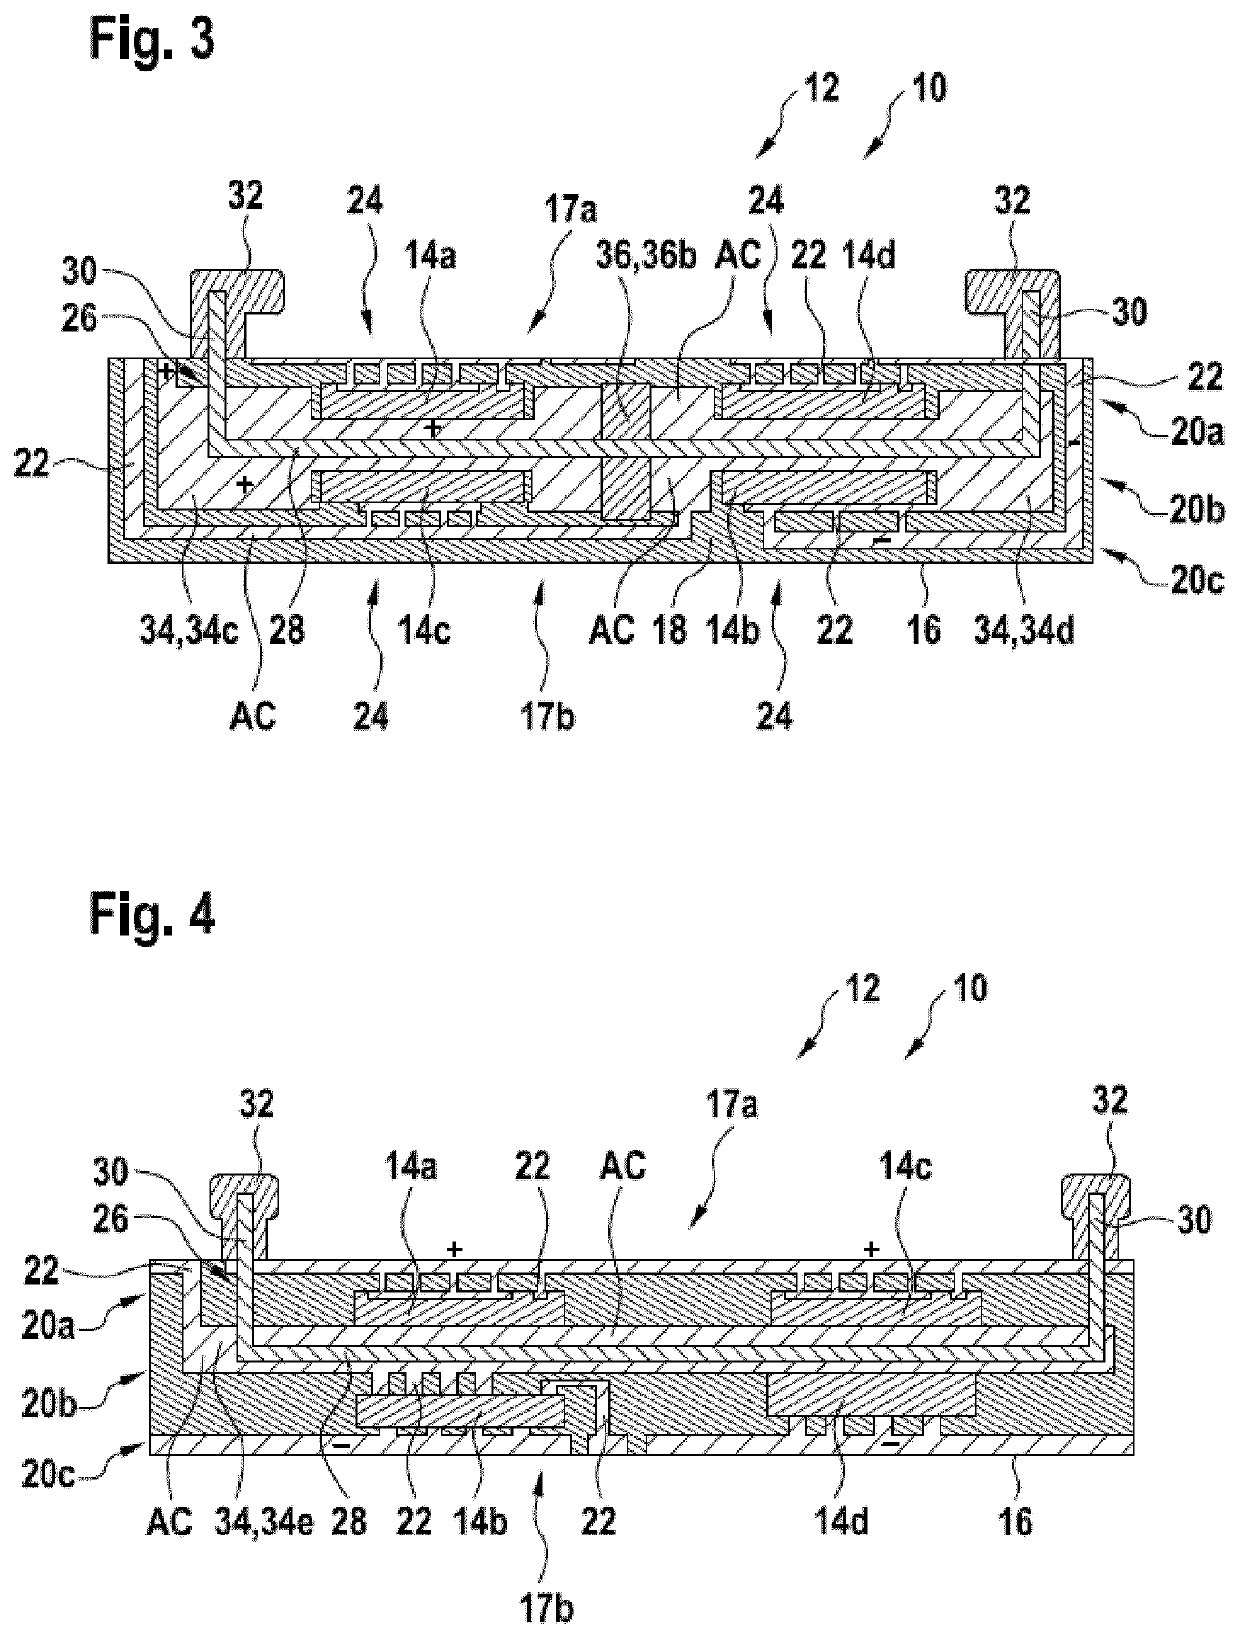 Cooled electronics package with stacked power electronics components